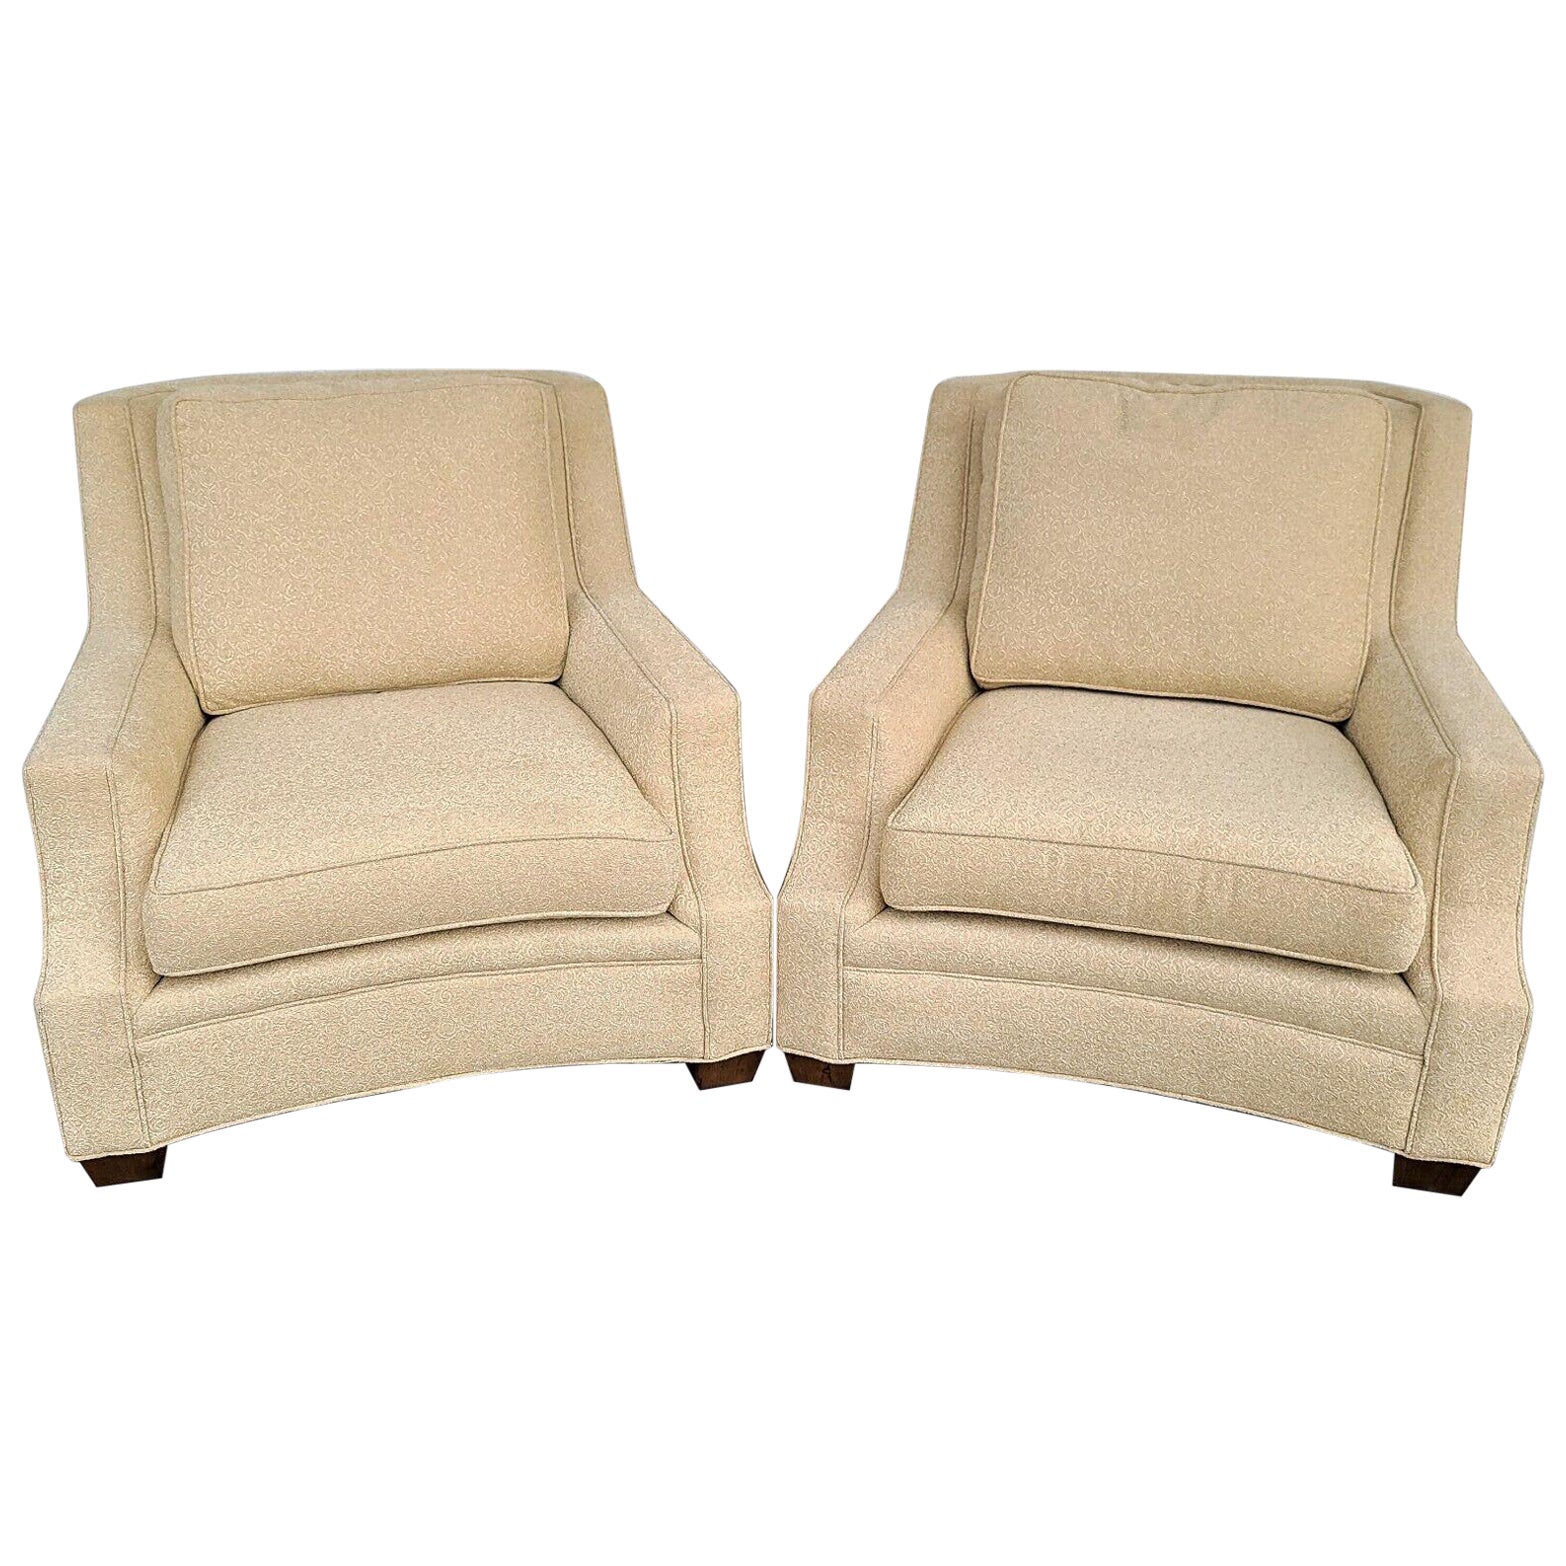 Art Deco Lounge Chairs by Century Furniture For Sale